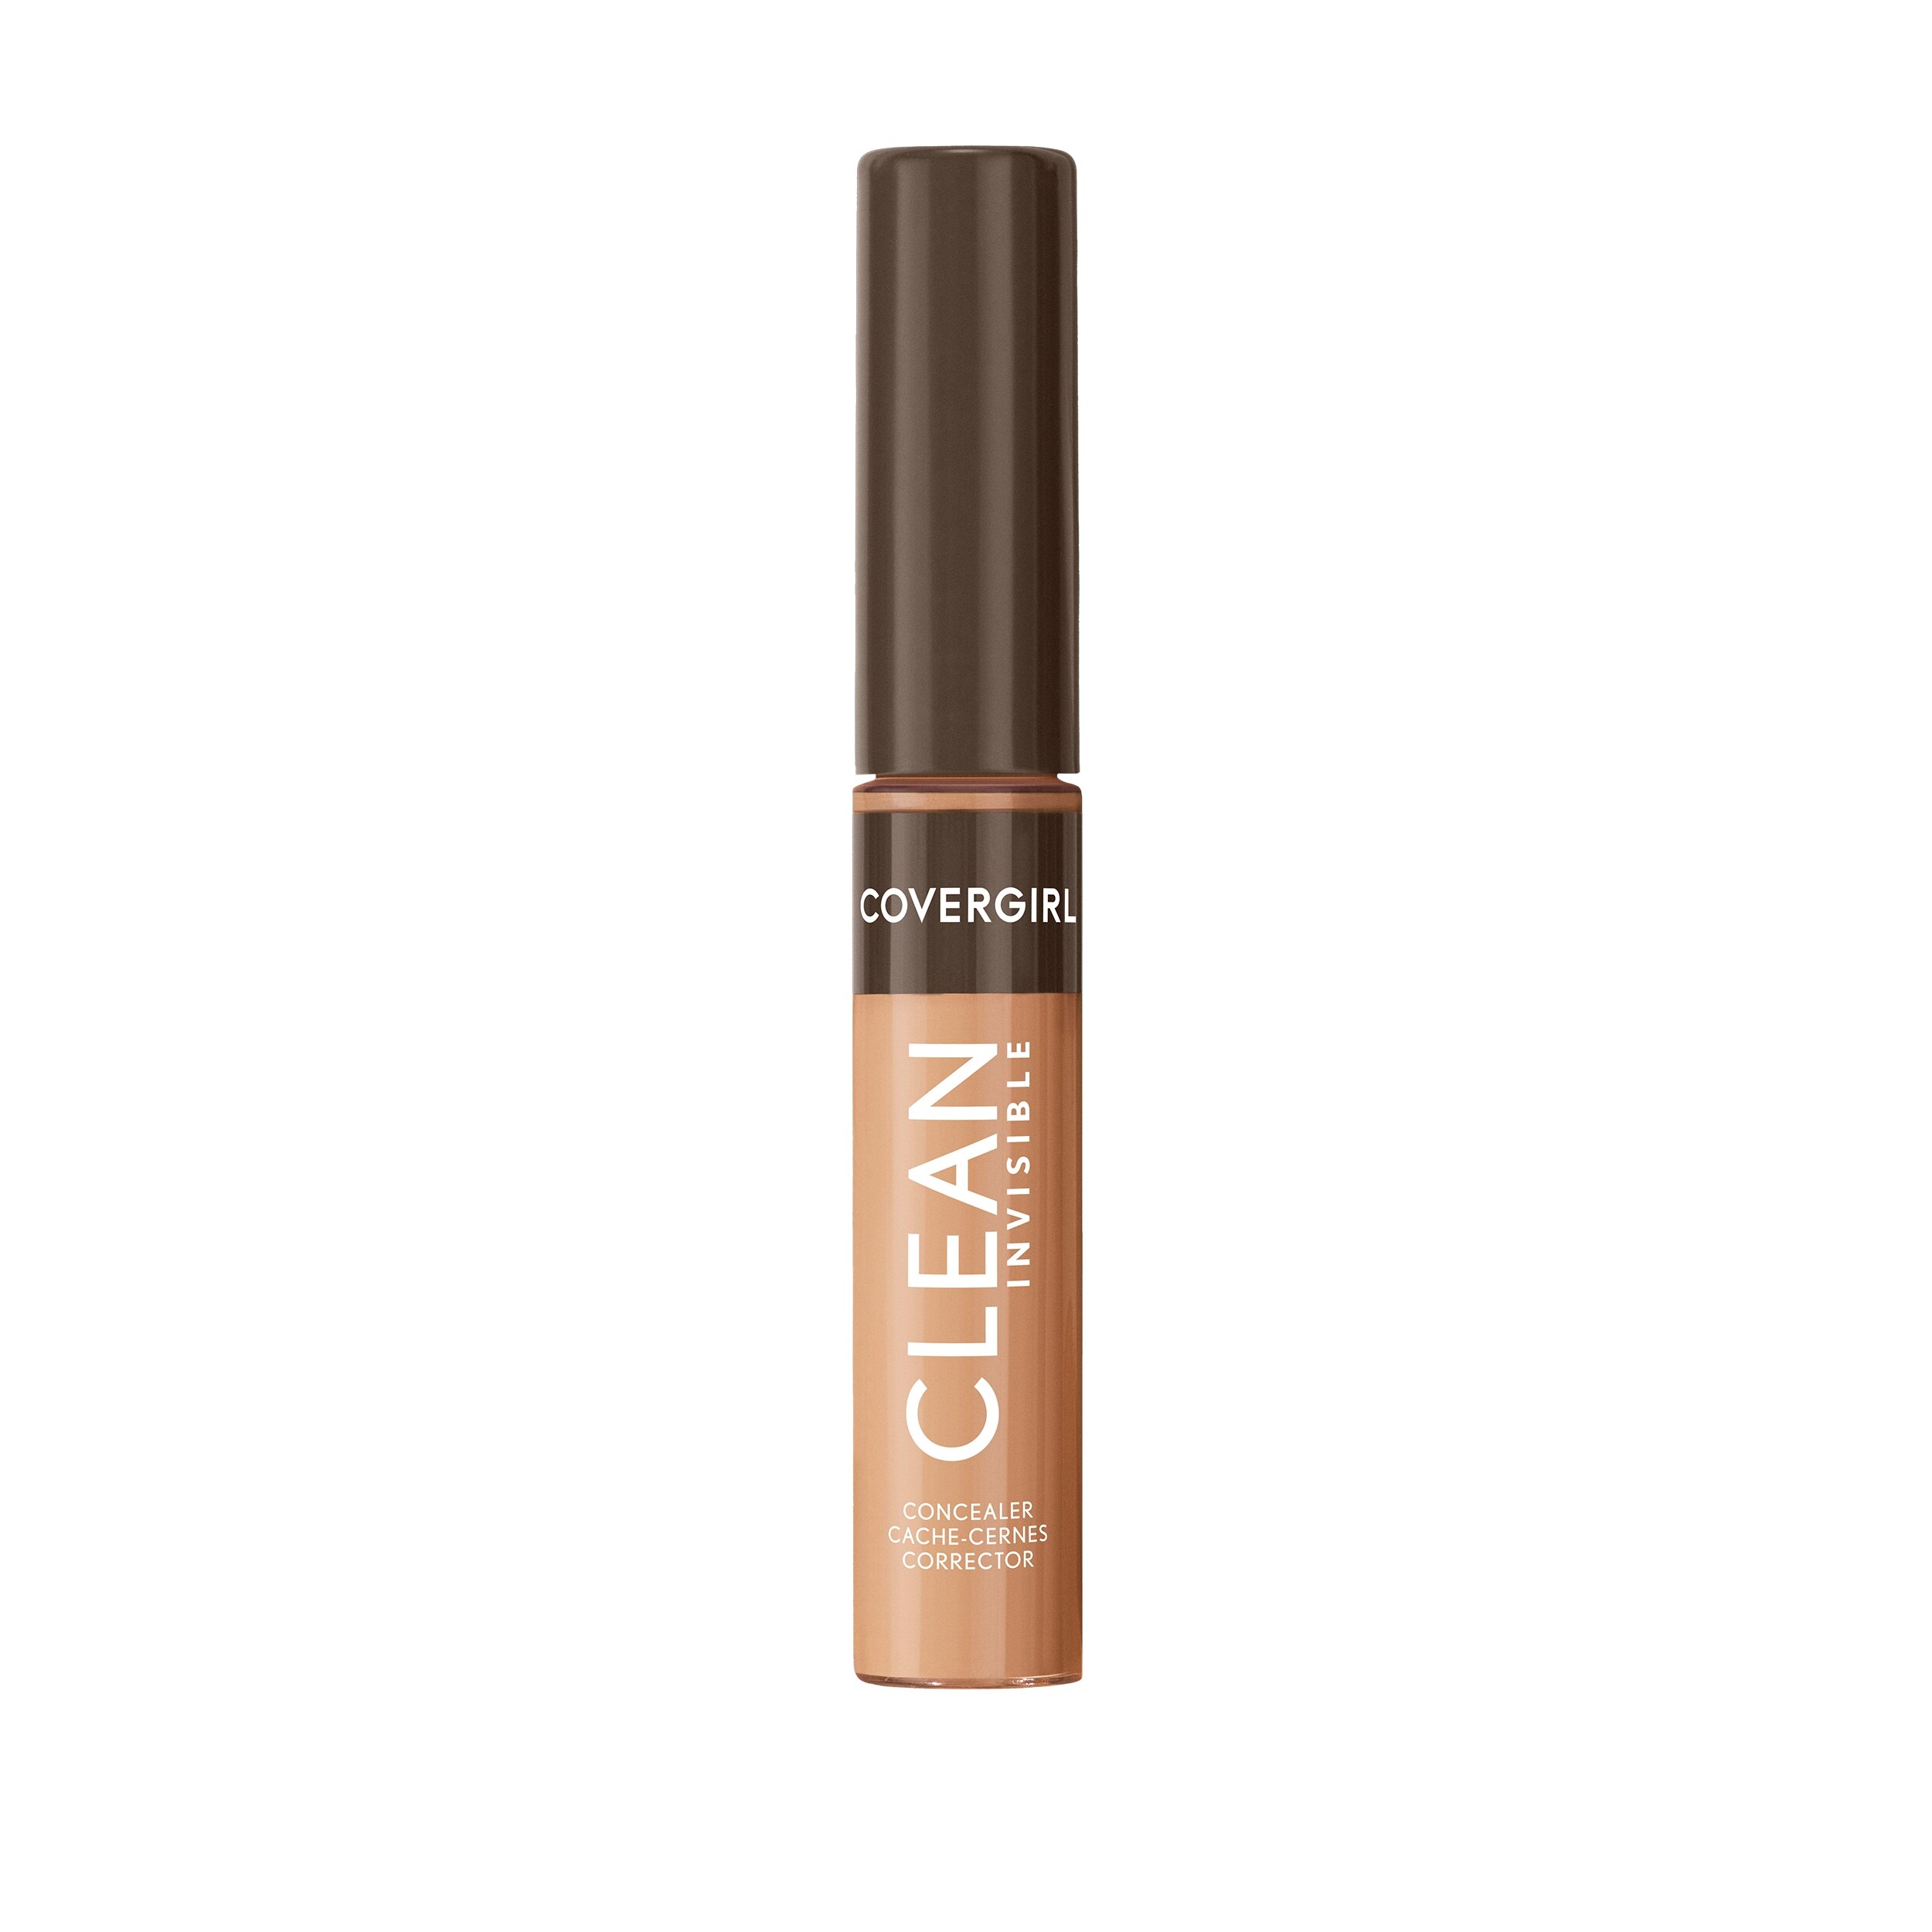 Covergirl Clean Invisible Concealer